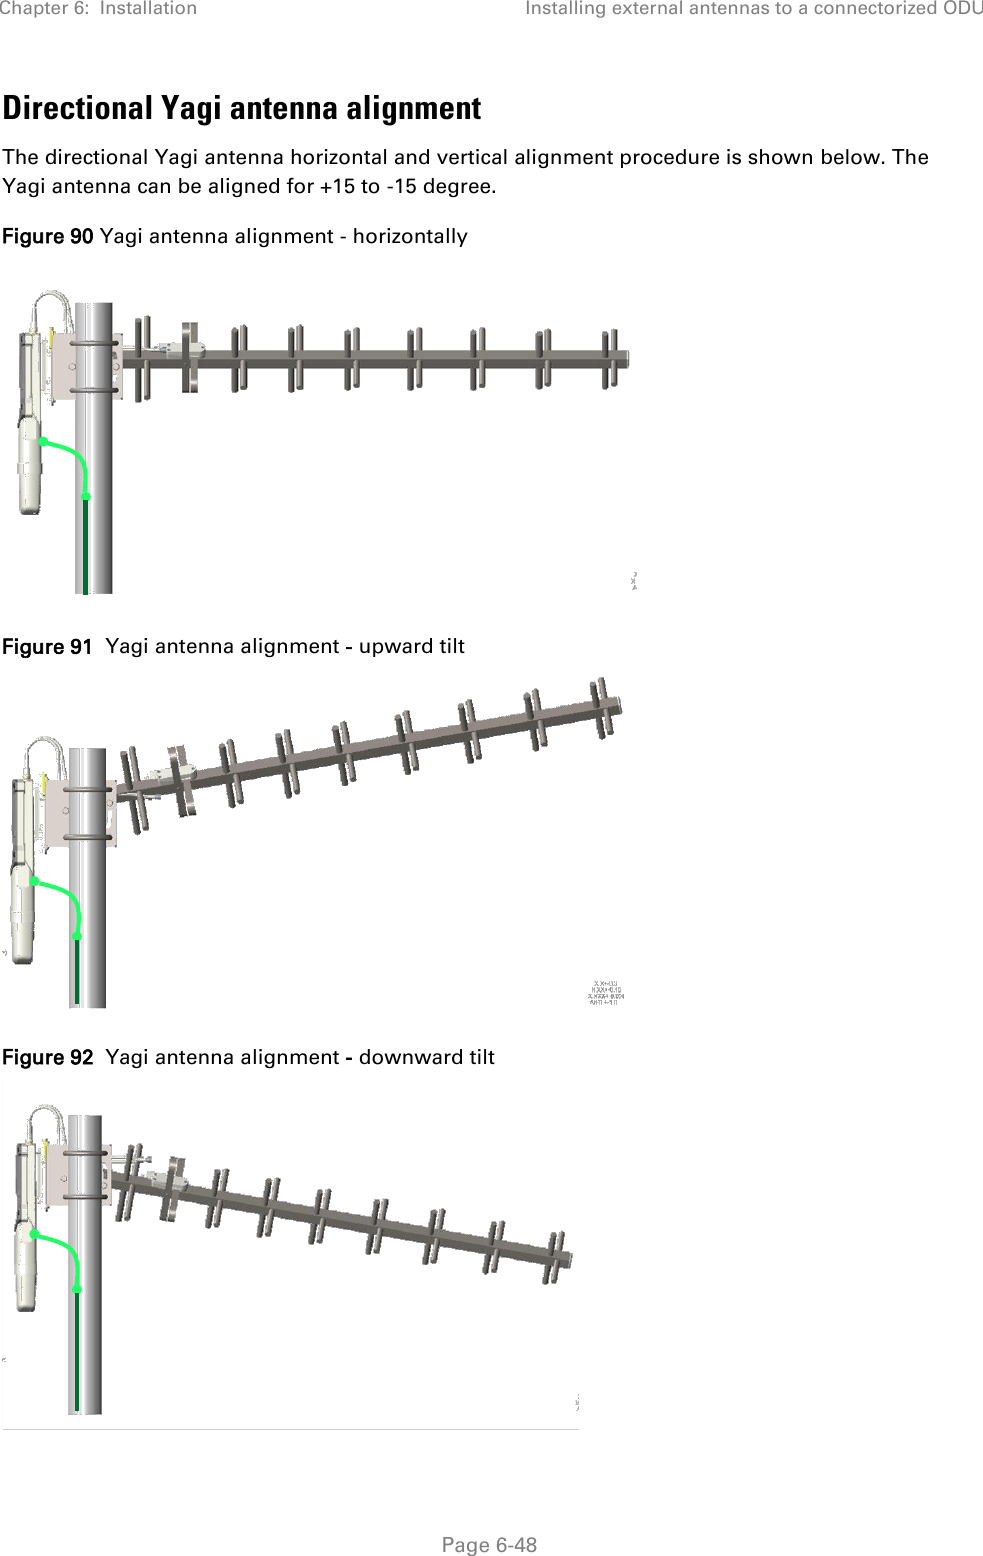 Chapter 6:  Installation Installing external antennas to a connectorized ODU   Page 6-48 Directional Yagi antenna alignment  The directional Yagi antenna horizontal and vertical alignment procedure is shown below. The Yagi antenna can be aligned for +15 to -15 degree. Figure 90 Yagi antenna alignment - horizontally  Figure 91  Yagi antenna alignment - upward tilt  Figure 92  Yagi antenna alignment - downward tilt  